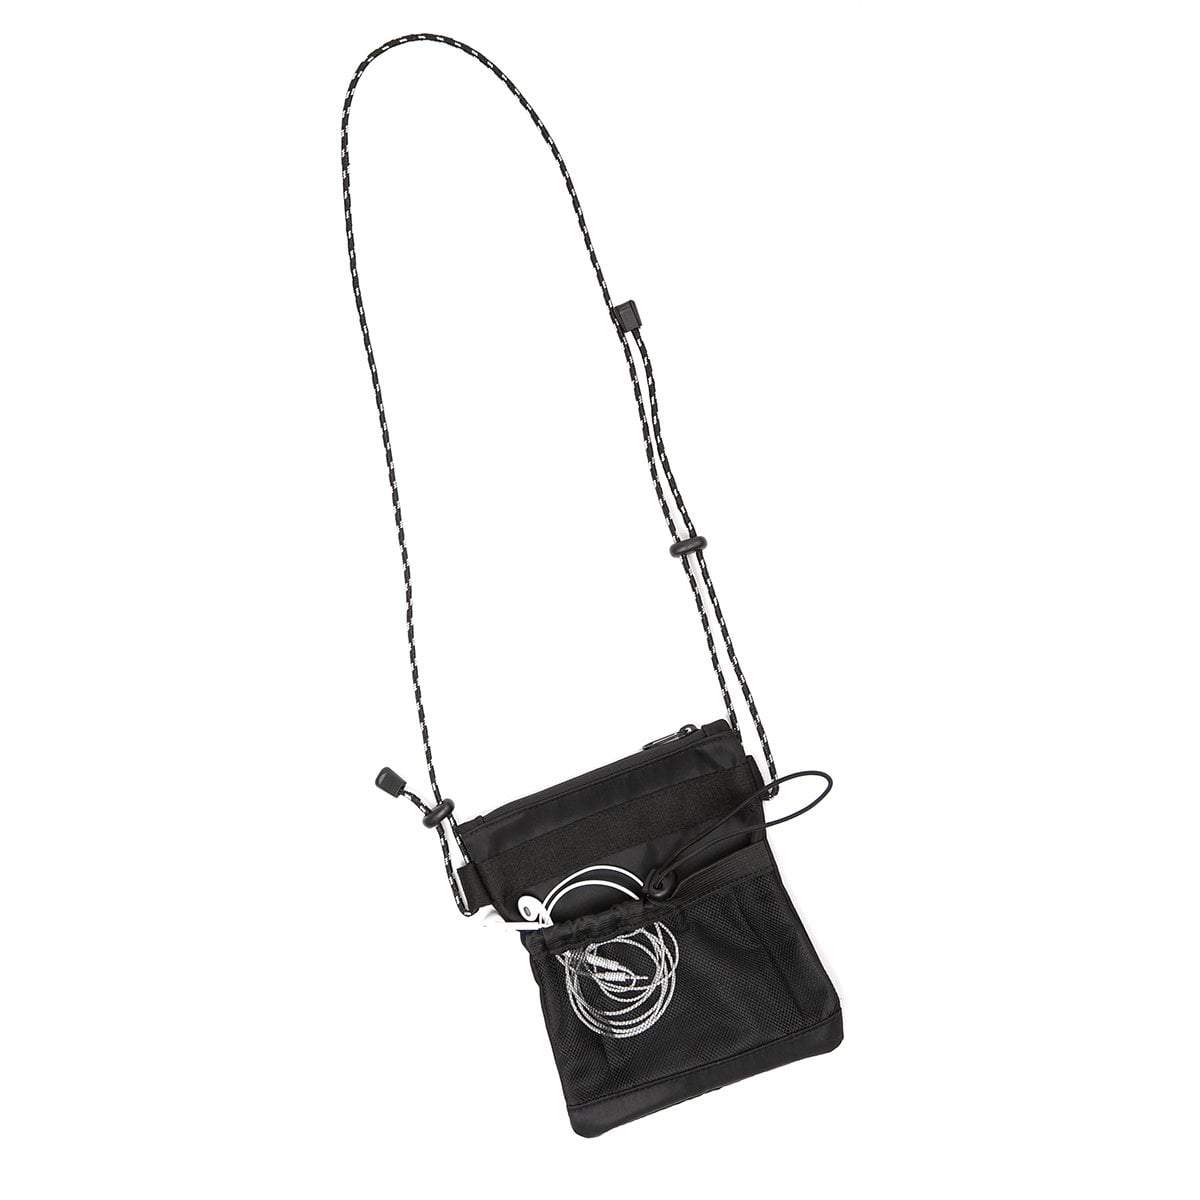 Edgy Silver Chain Strap Small Black Shoulder Bag